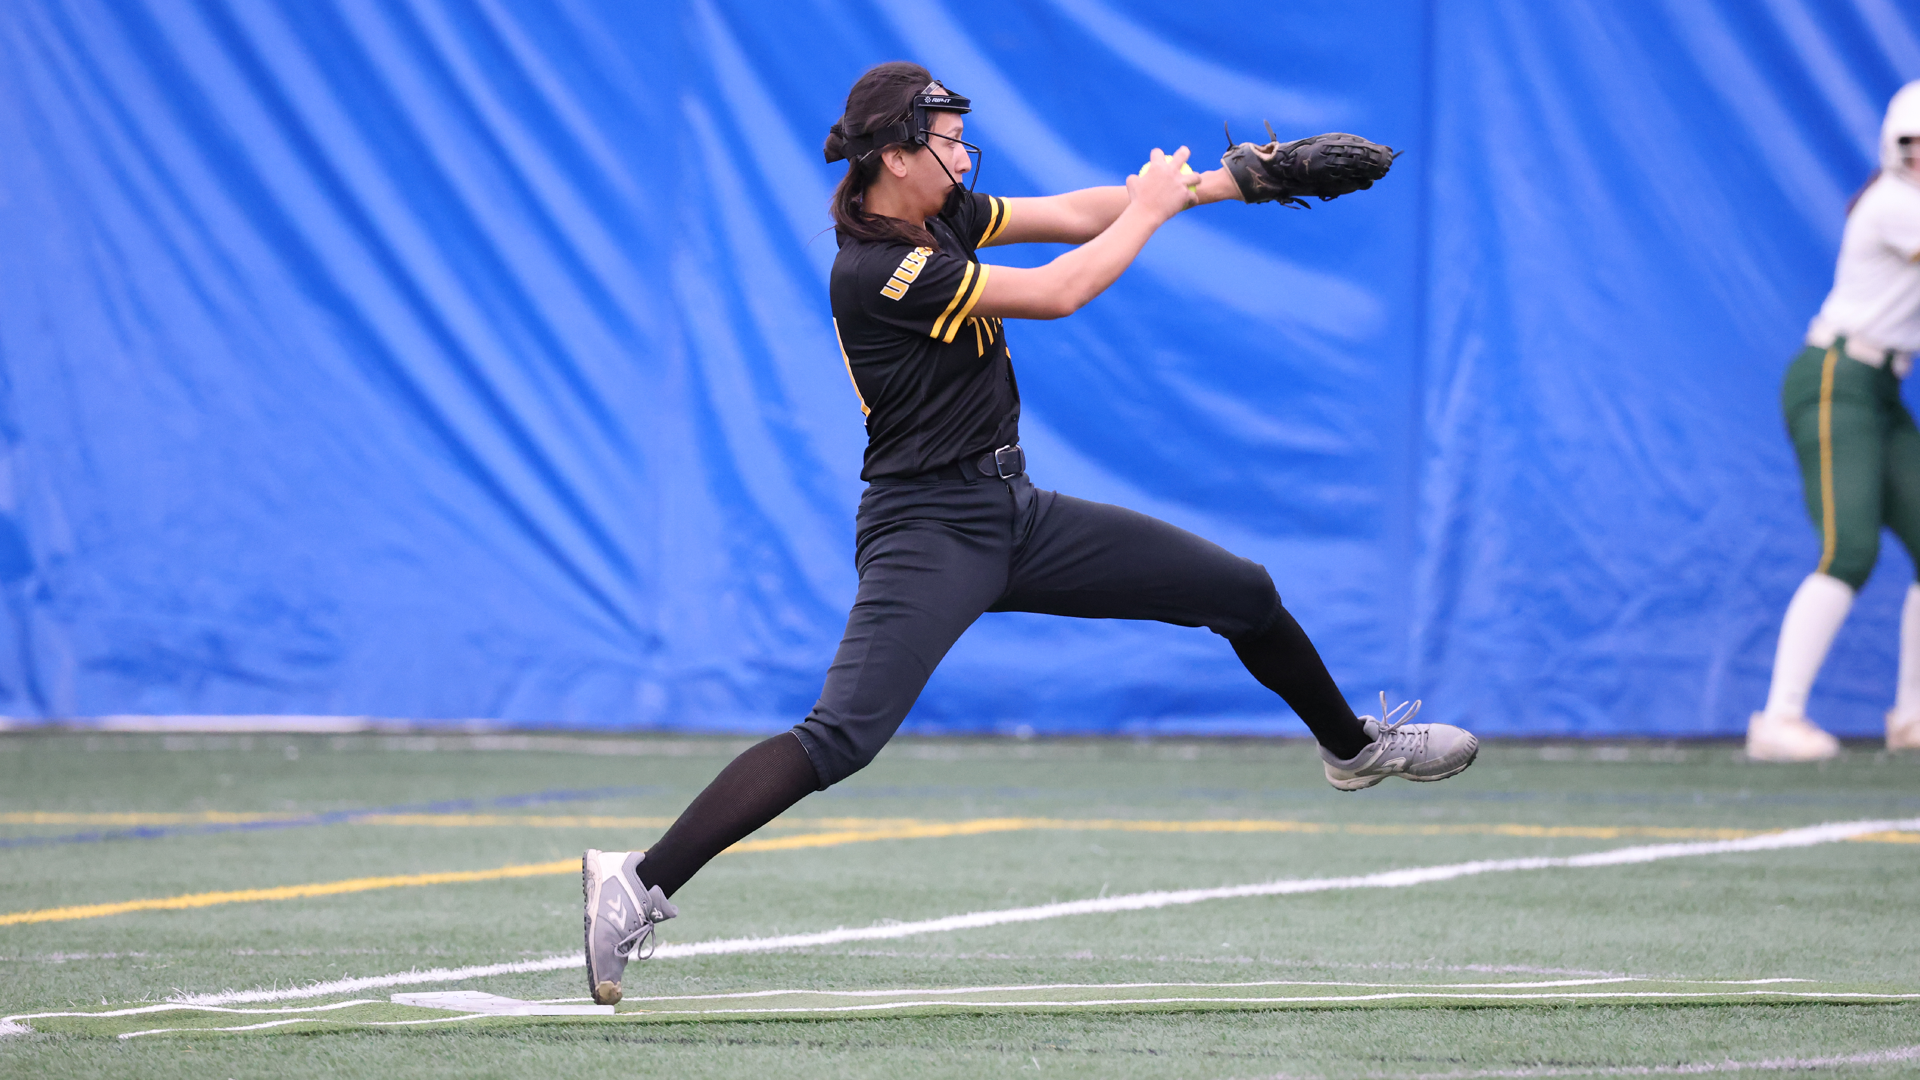 Brianna Bougie threw the 14th no-hitter in program history on Tuesday as the Titans swept St. Norbert College in Oshkosh. Photo Credit: Steve Frommell, UW-Oshkosh Sports Information